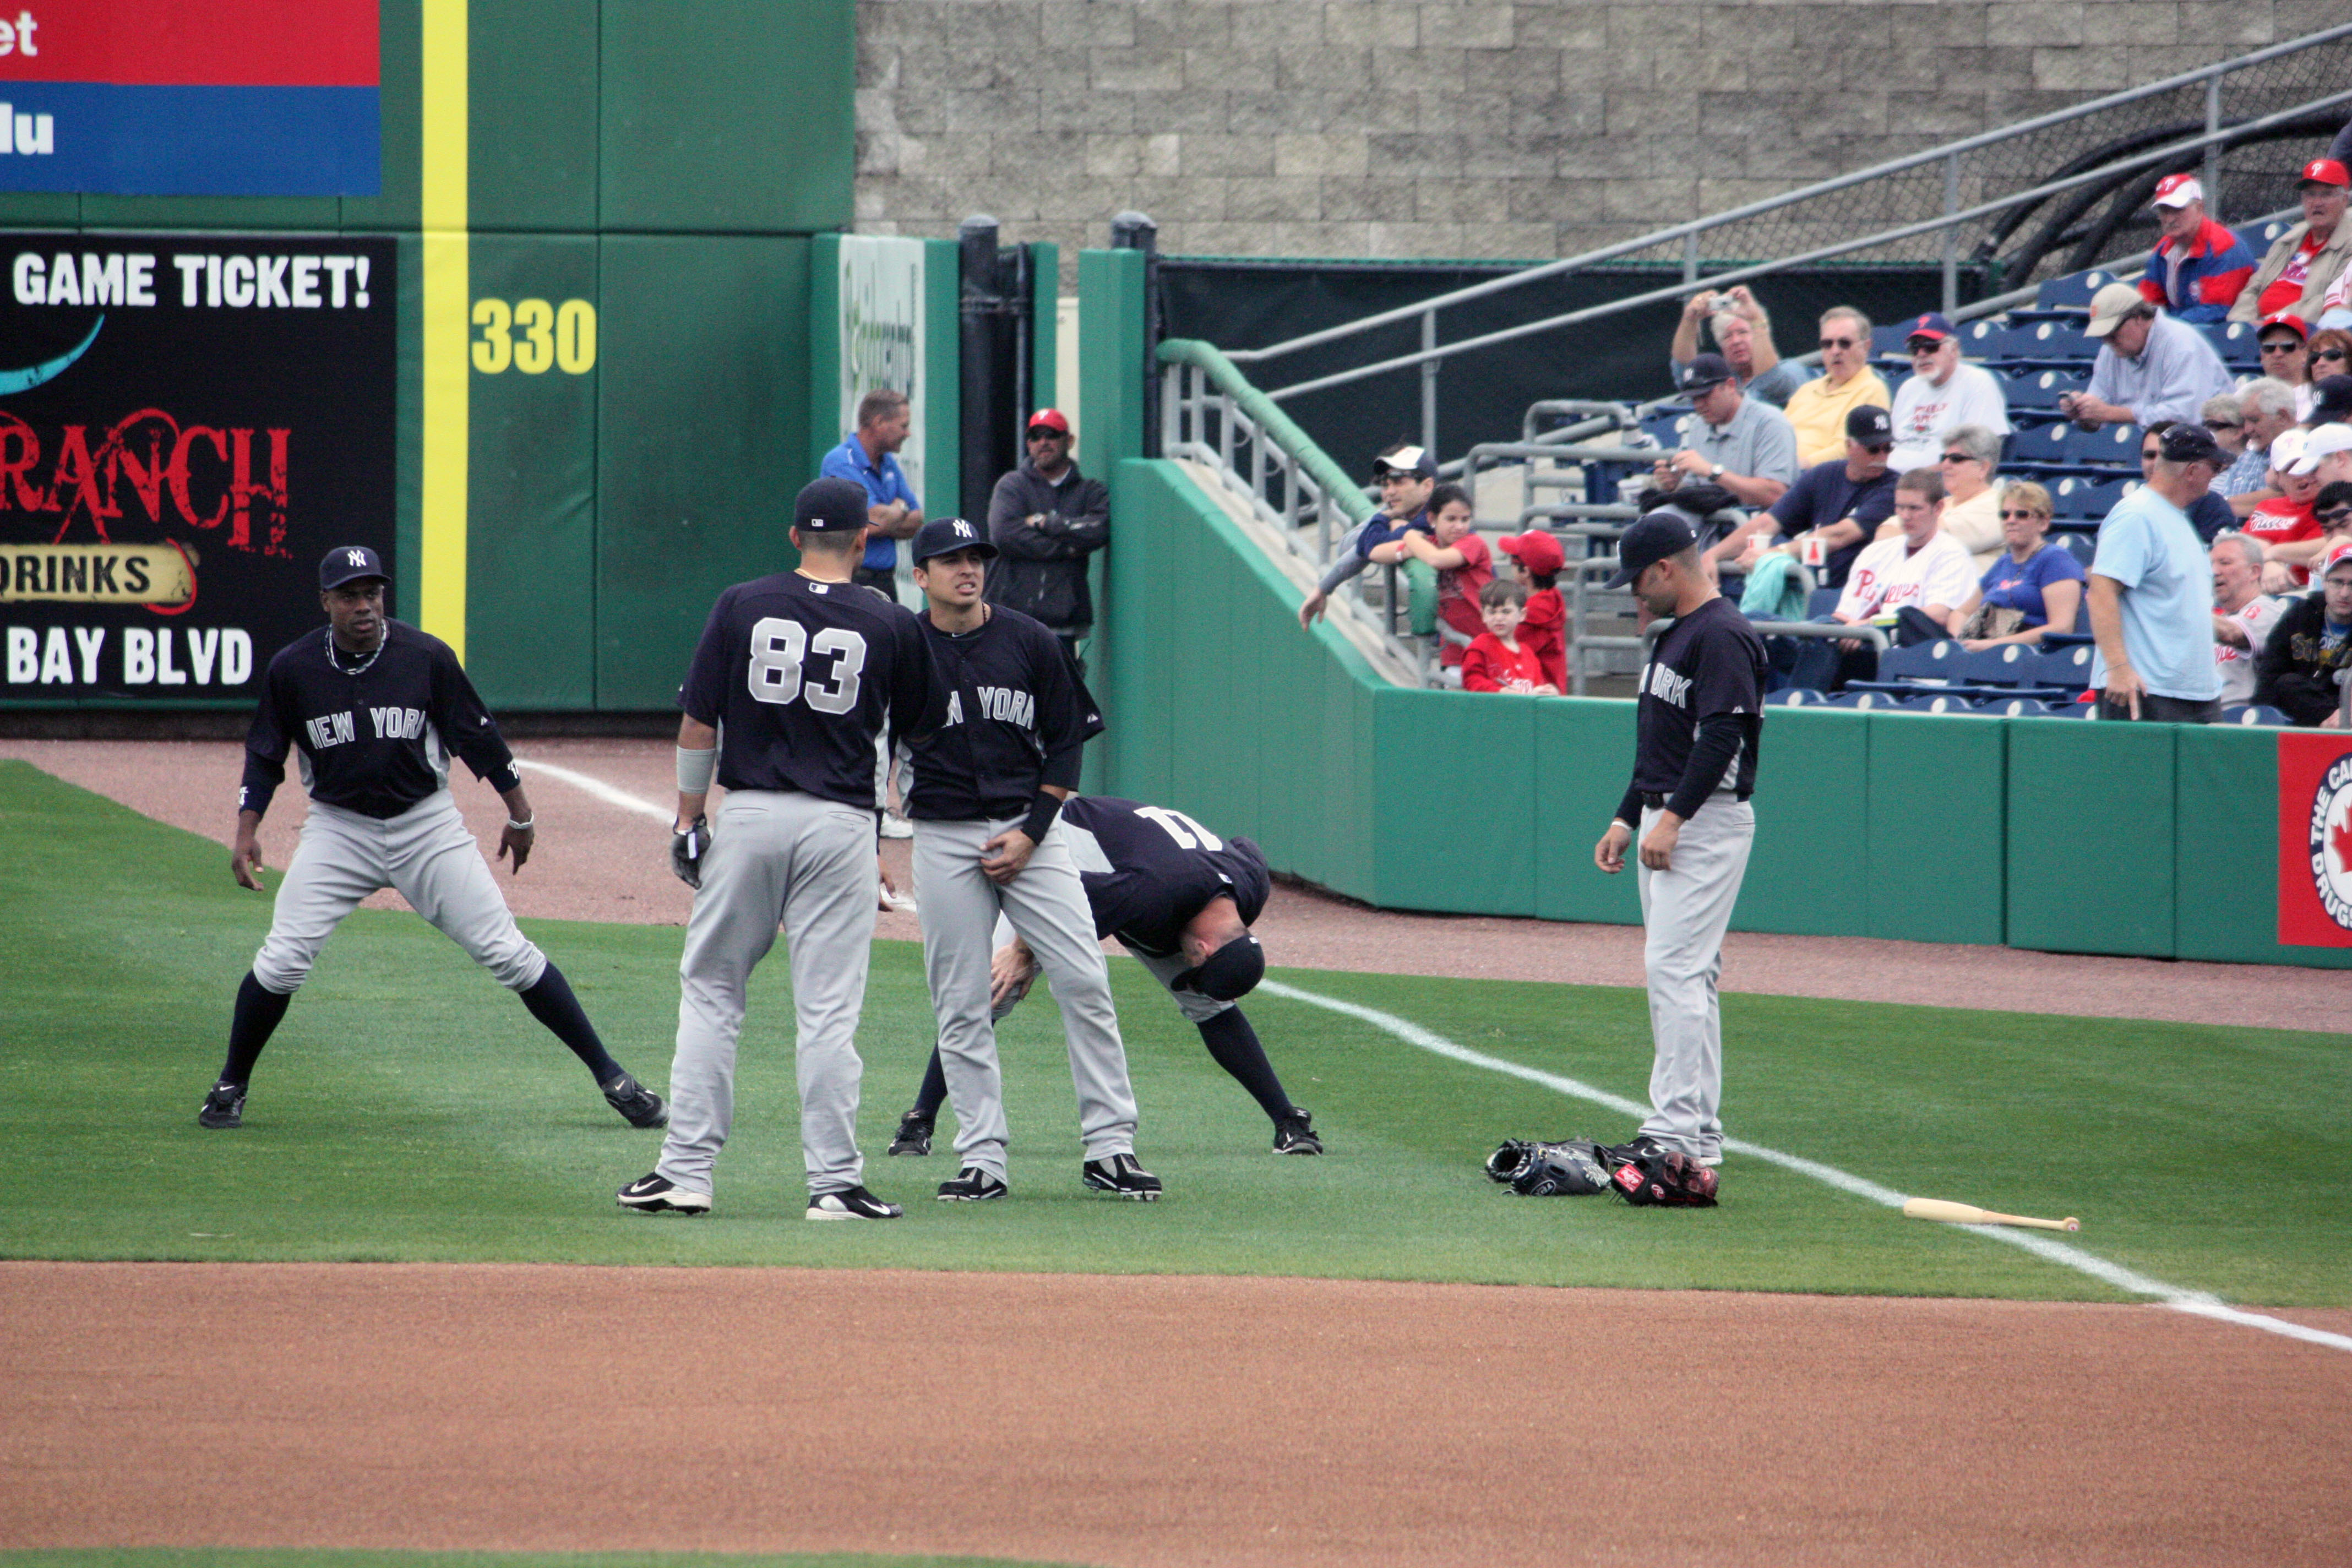 yankees-stretch-before-their-march-10th-game.jpg 